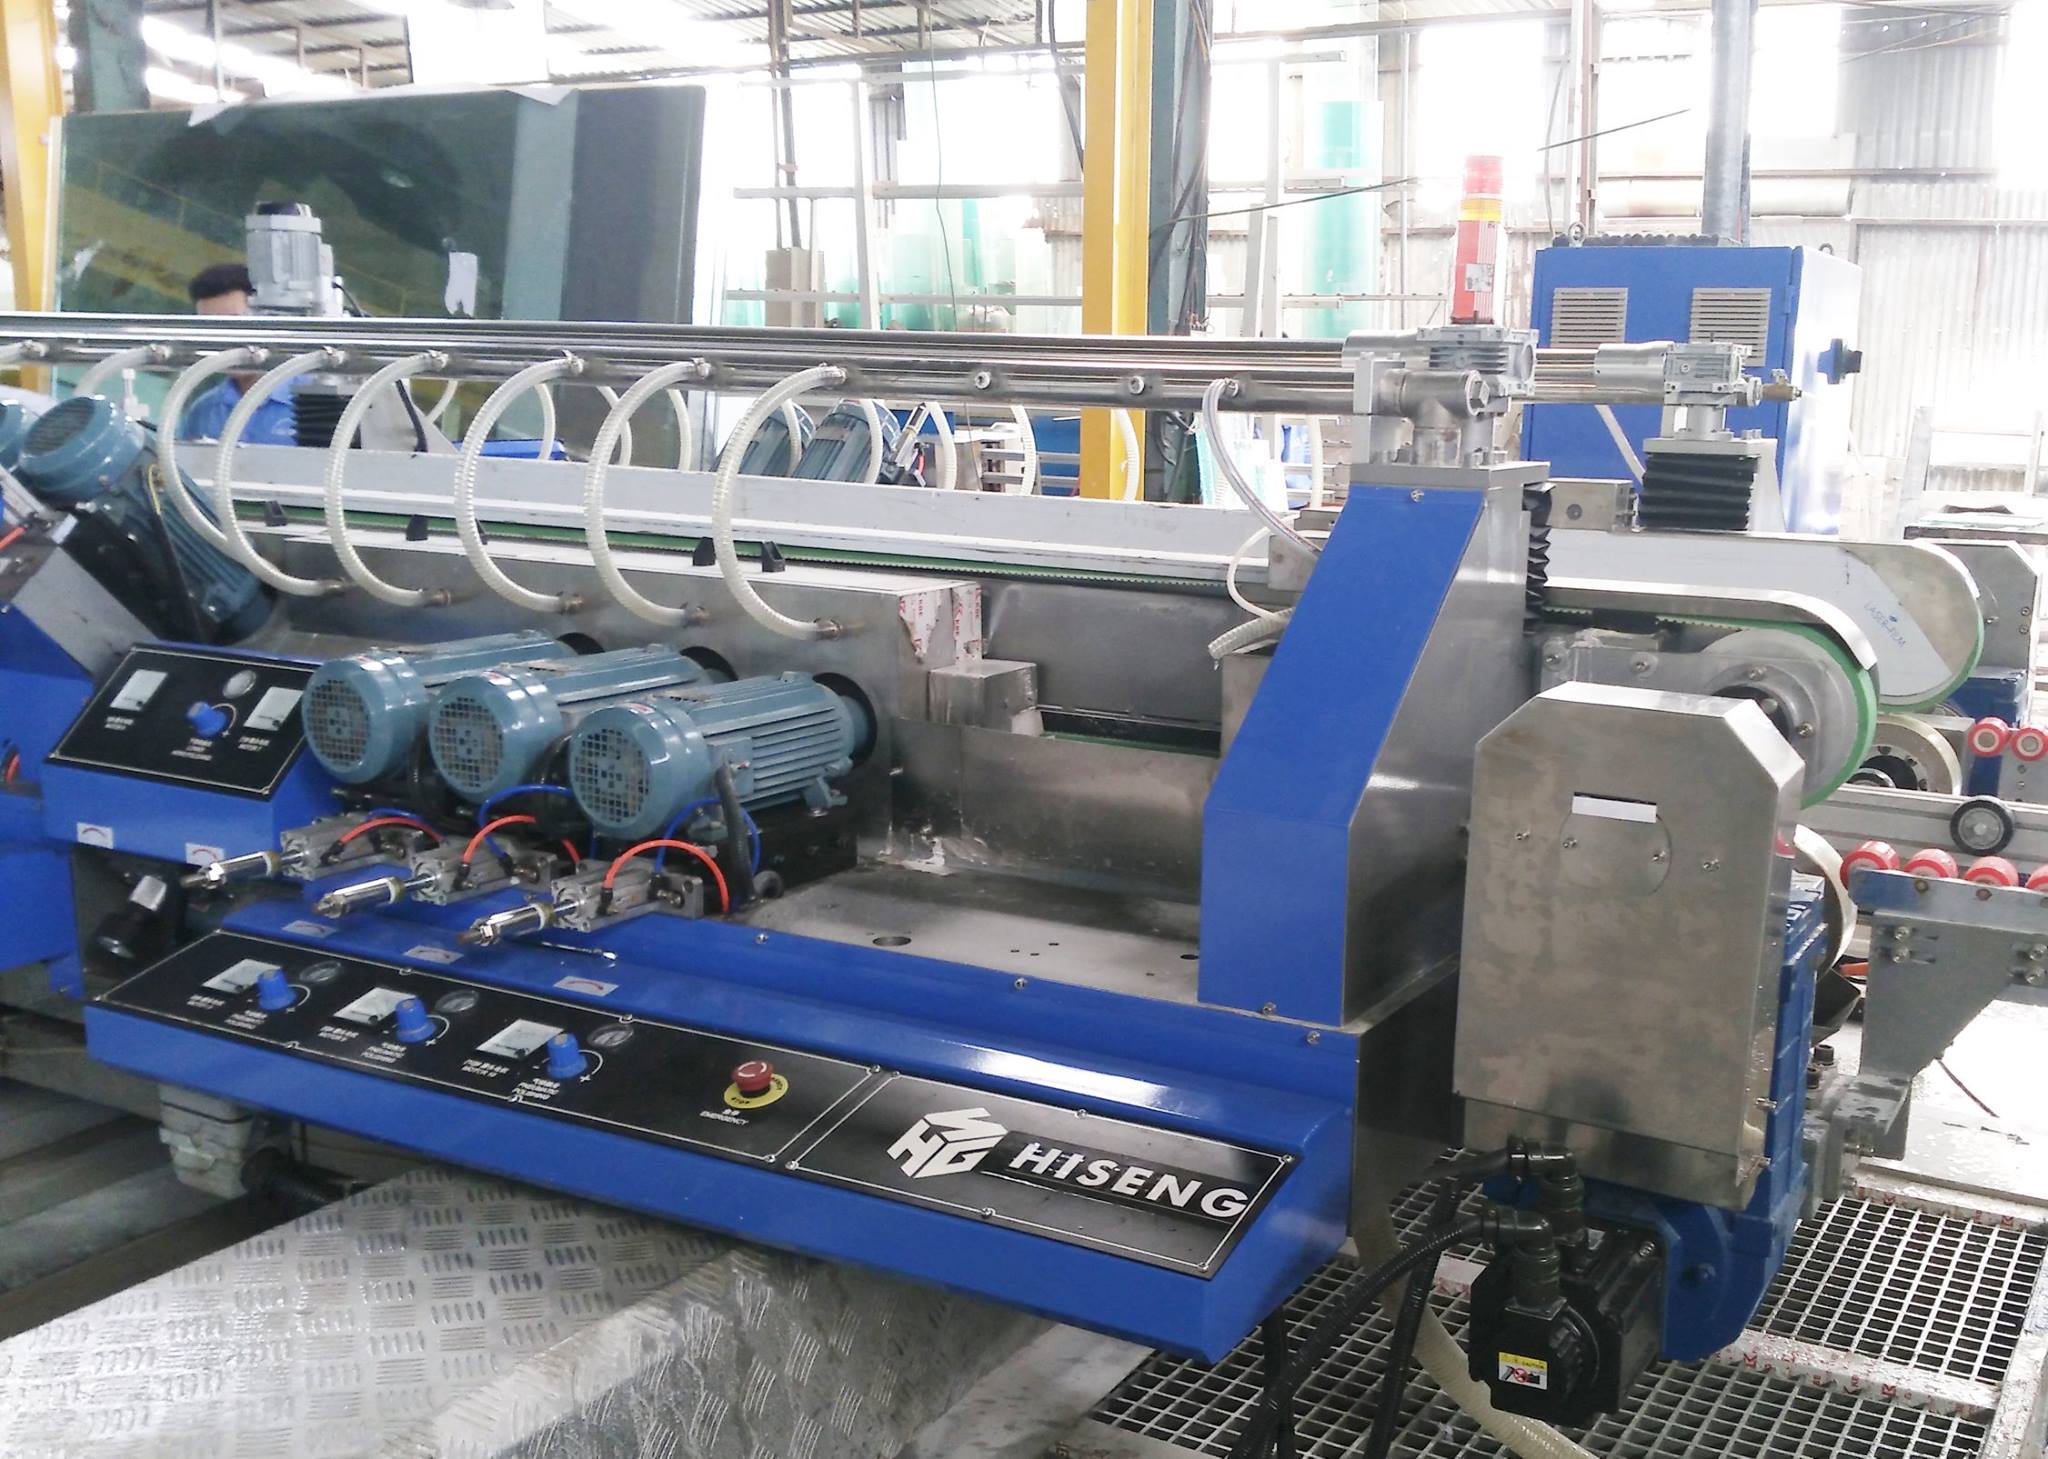 Finished installation and technology transfer for HISENG glass double edging machine at HAI NAM GLASS factory